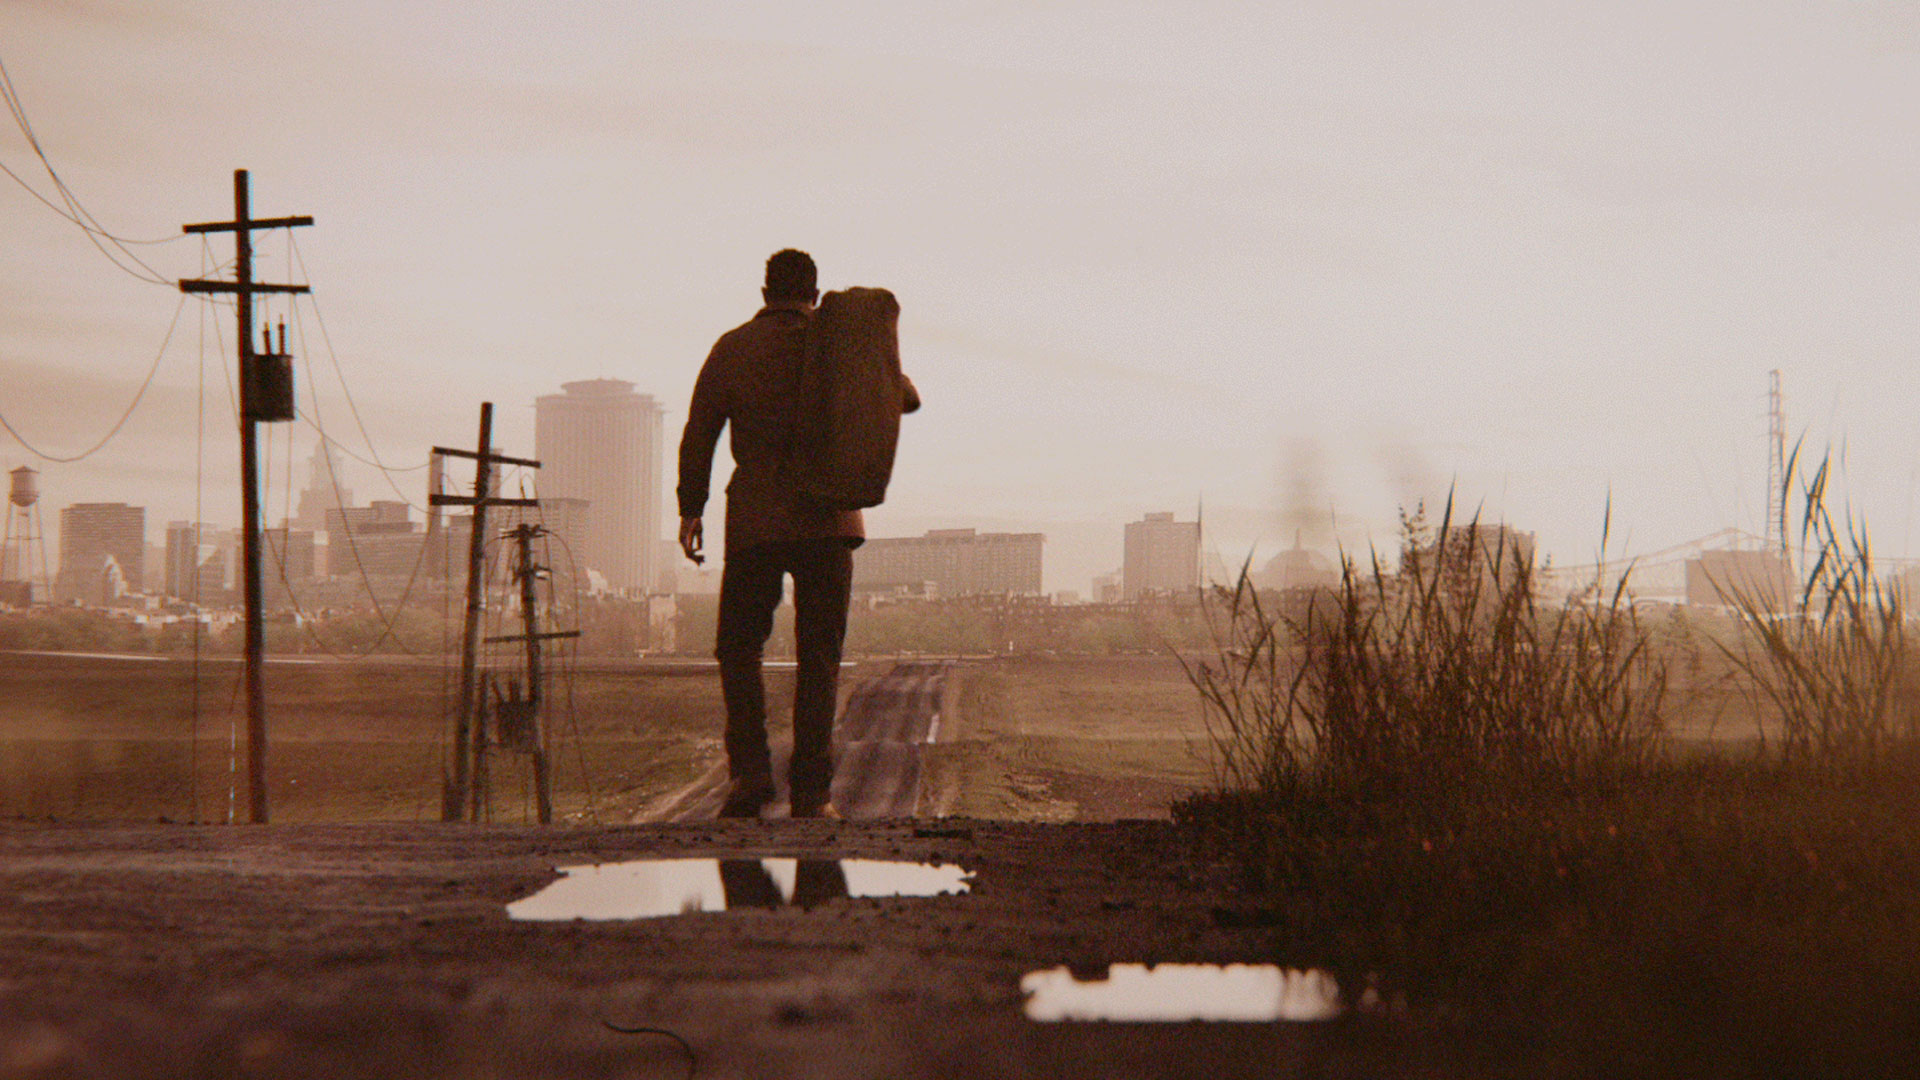 Mafia 3's protagonist walking away from the camera towards a town.